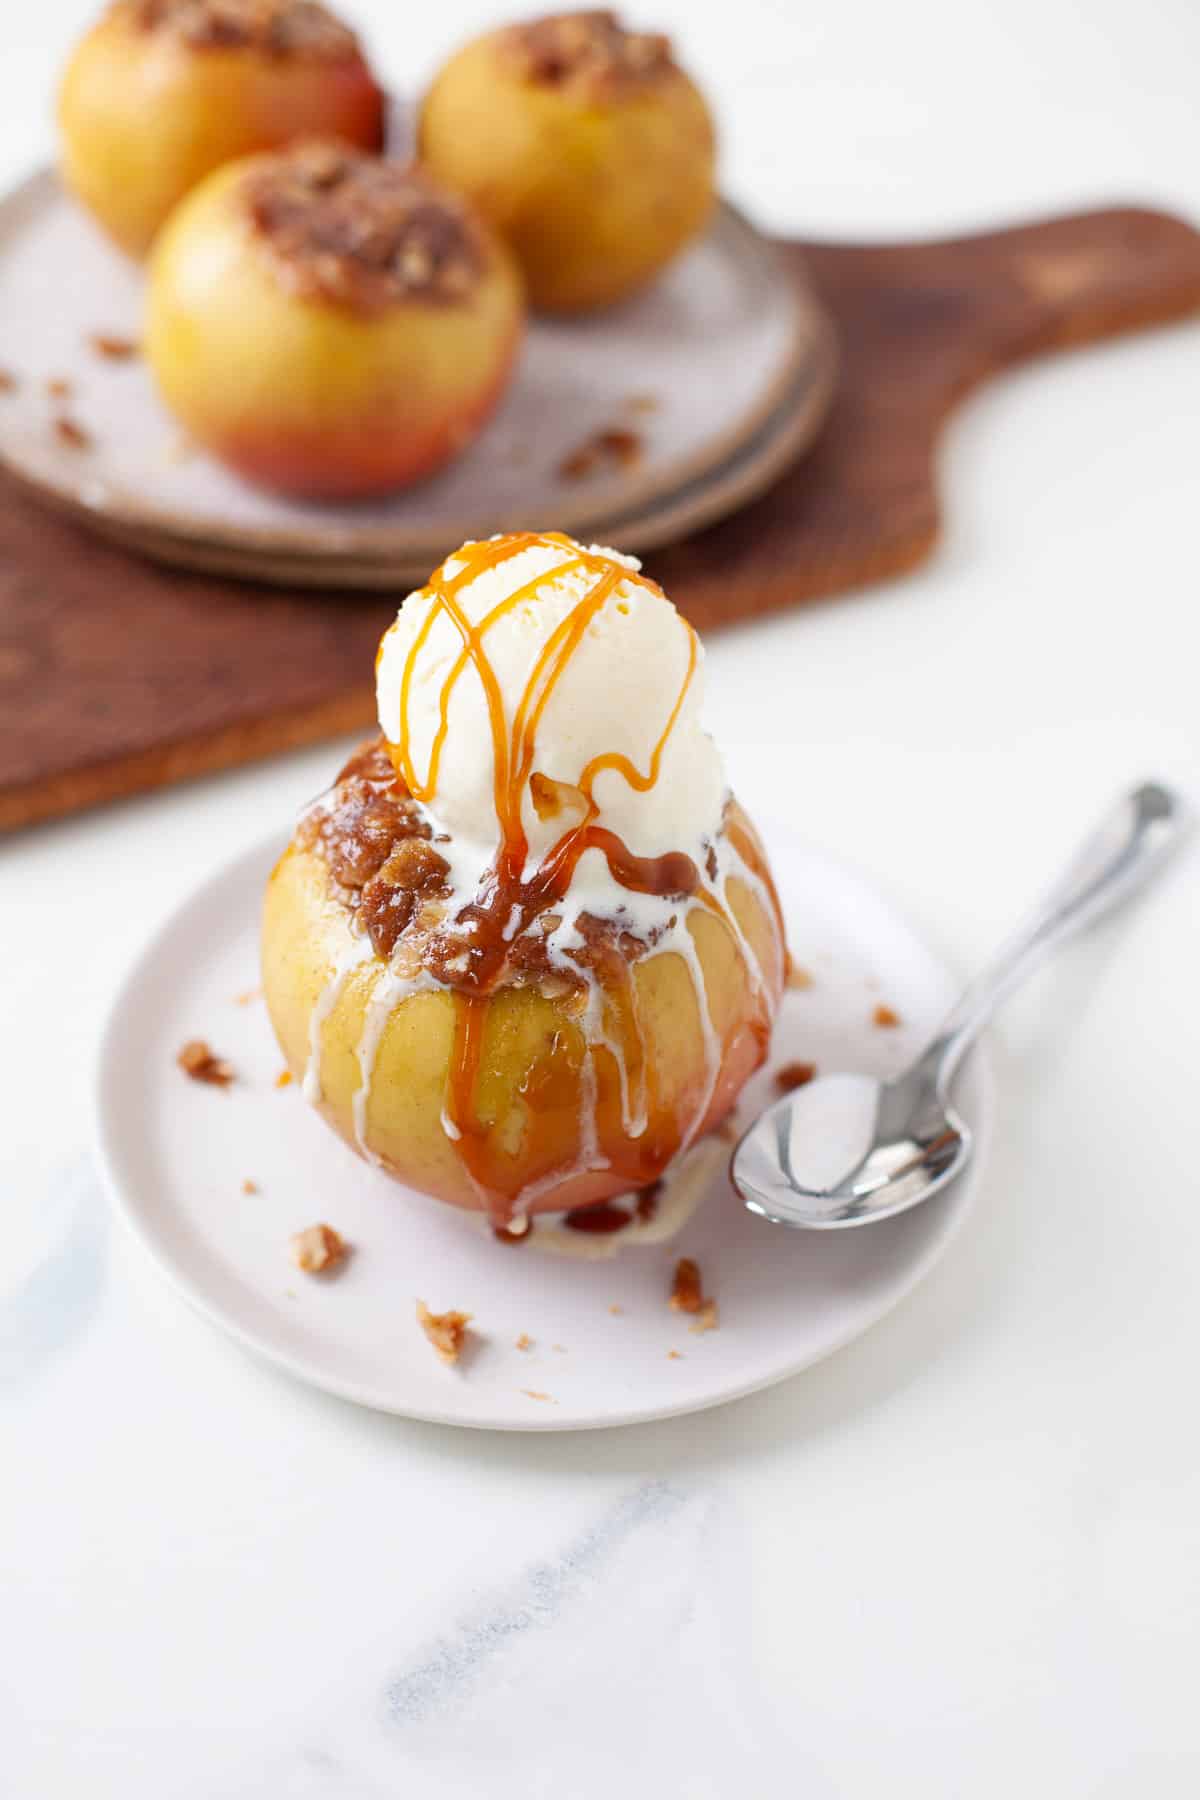 baked apple with cinnamon oat mixture with scoop of vanilla ice cream and caramel drizzle with three baked apples in foreground